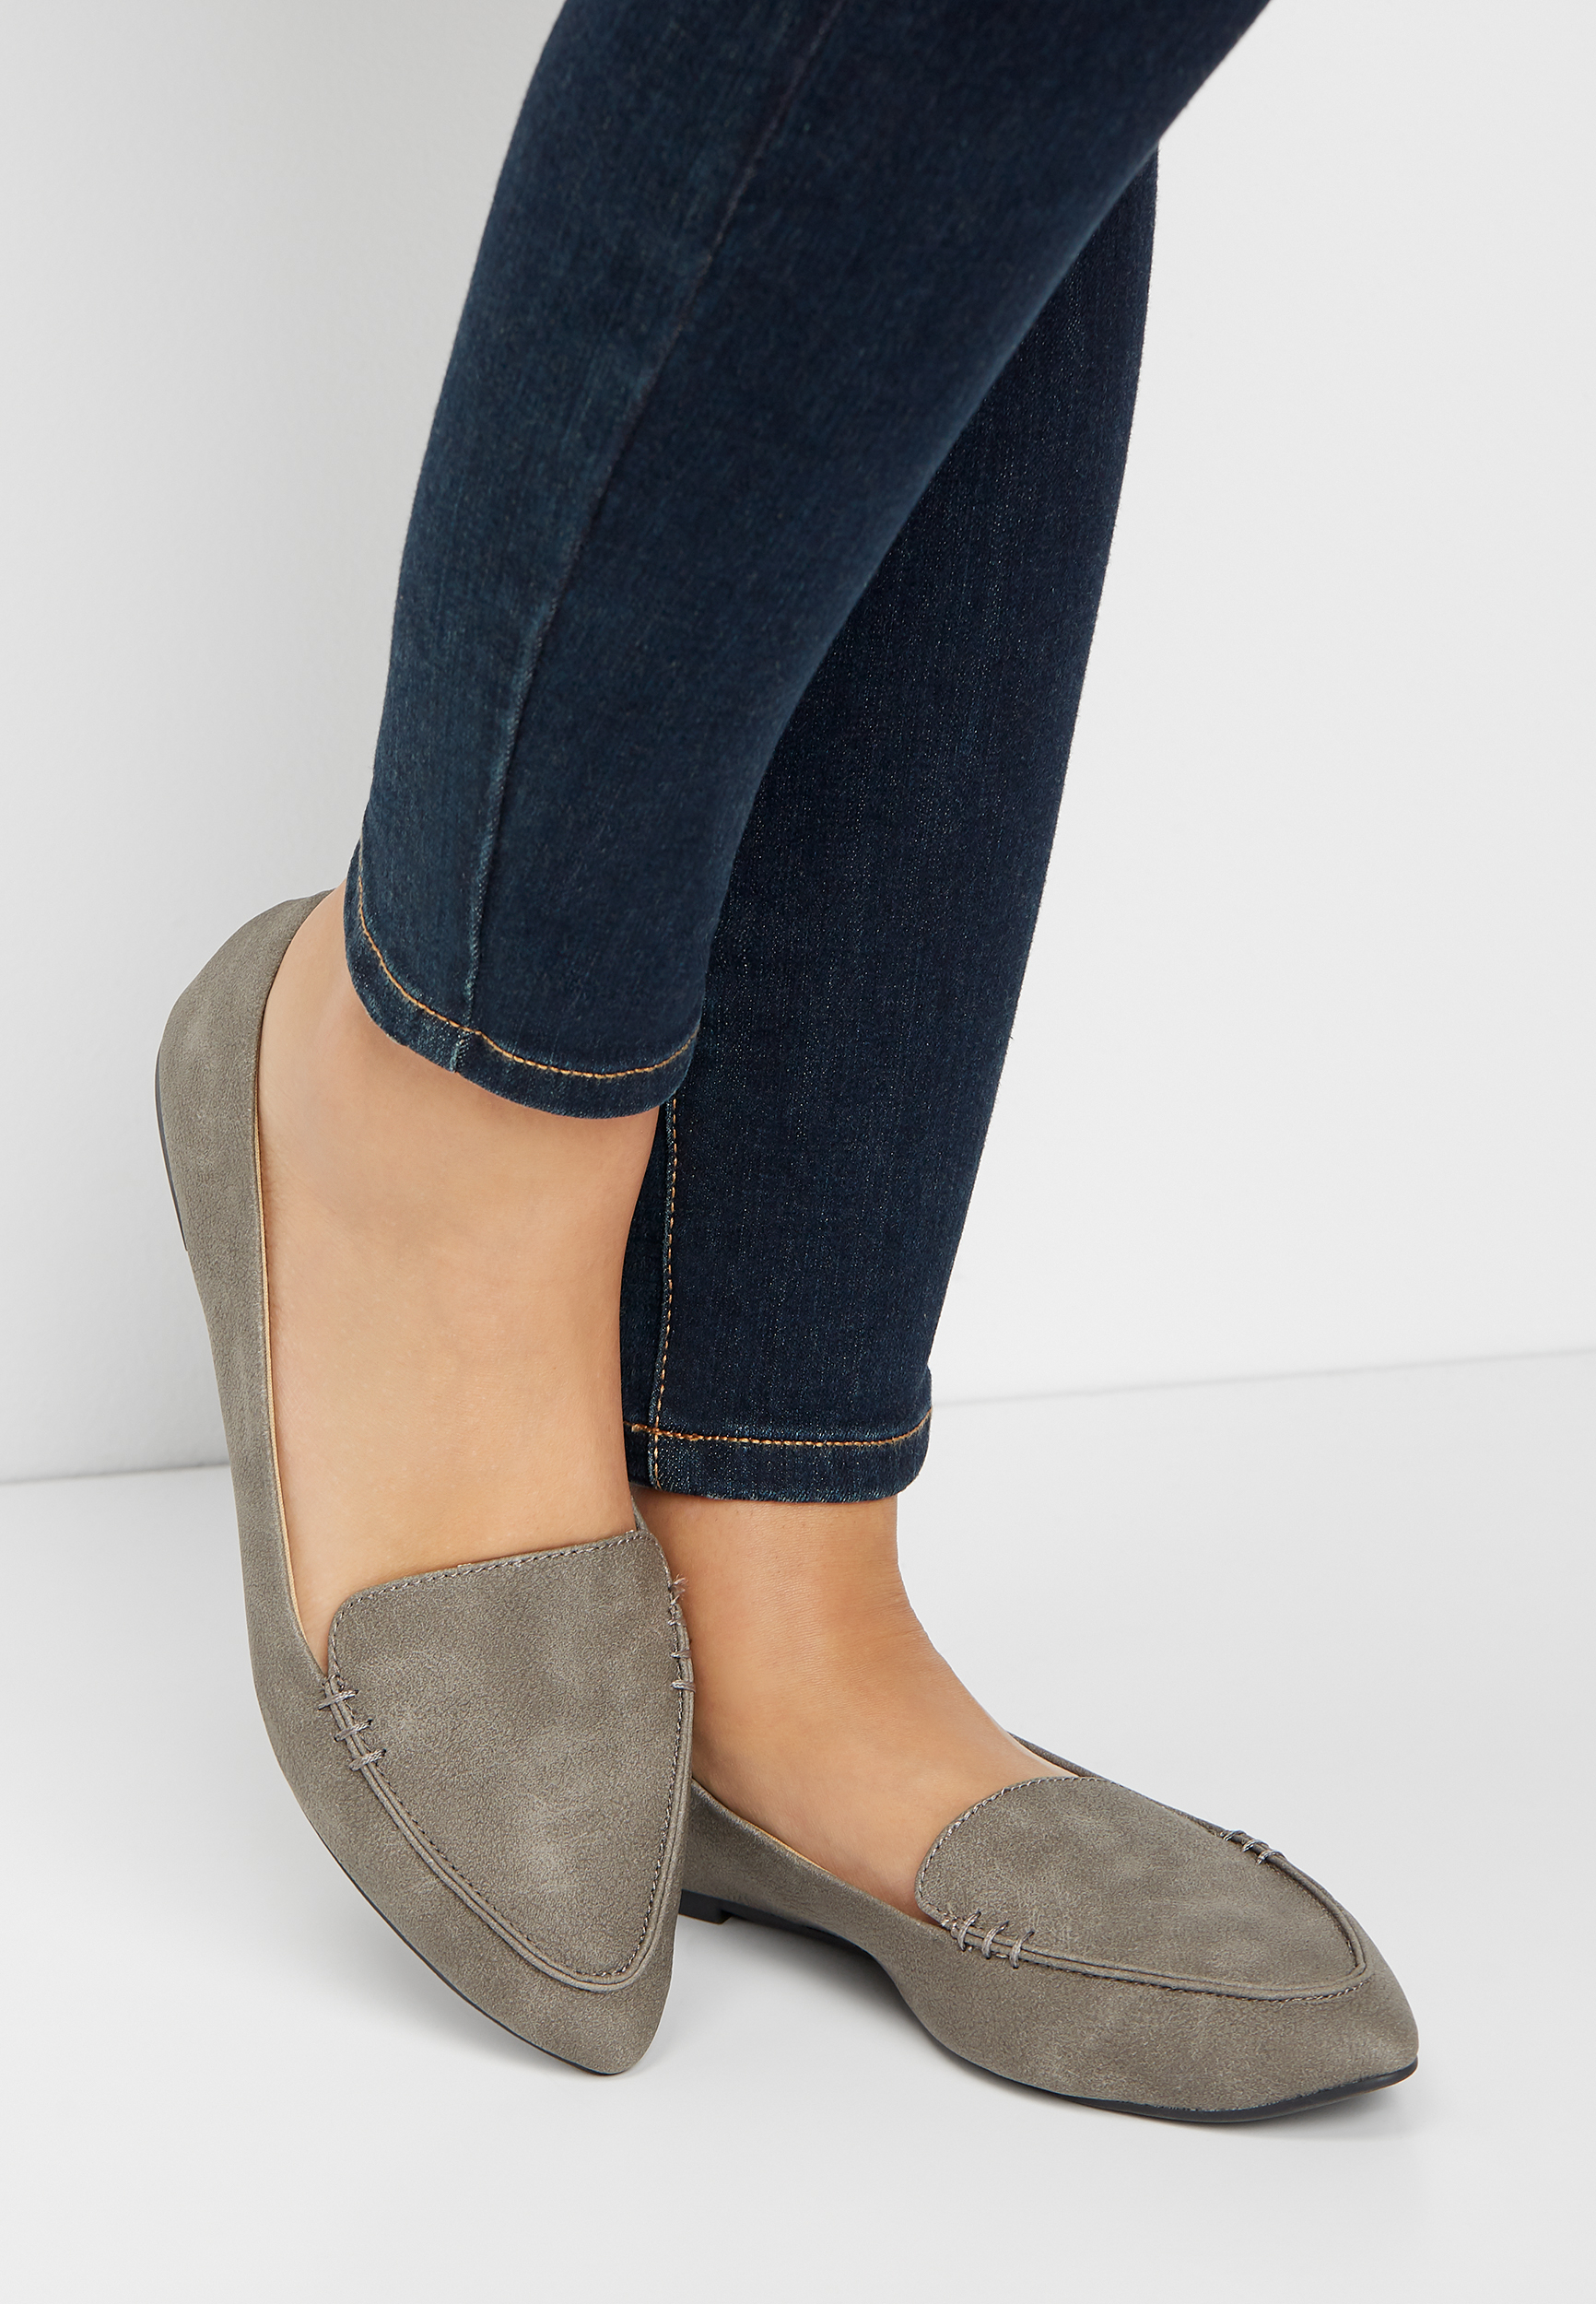 Blair pointed toe flats | maurices